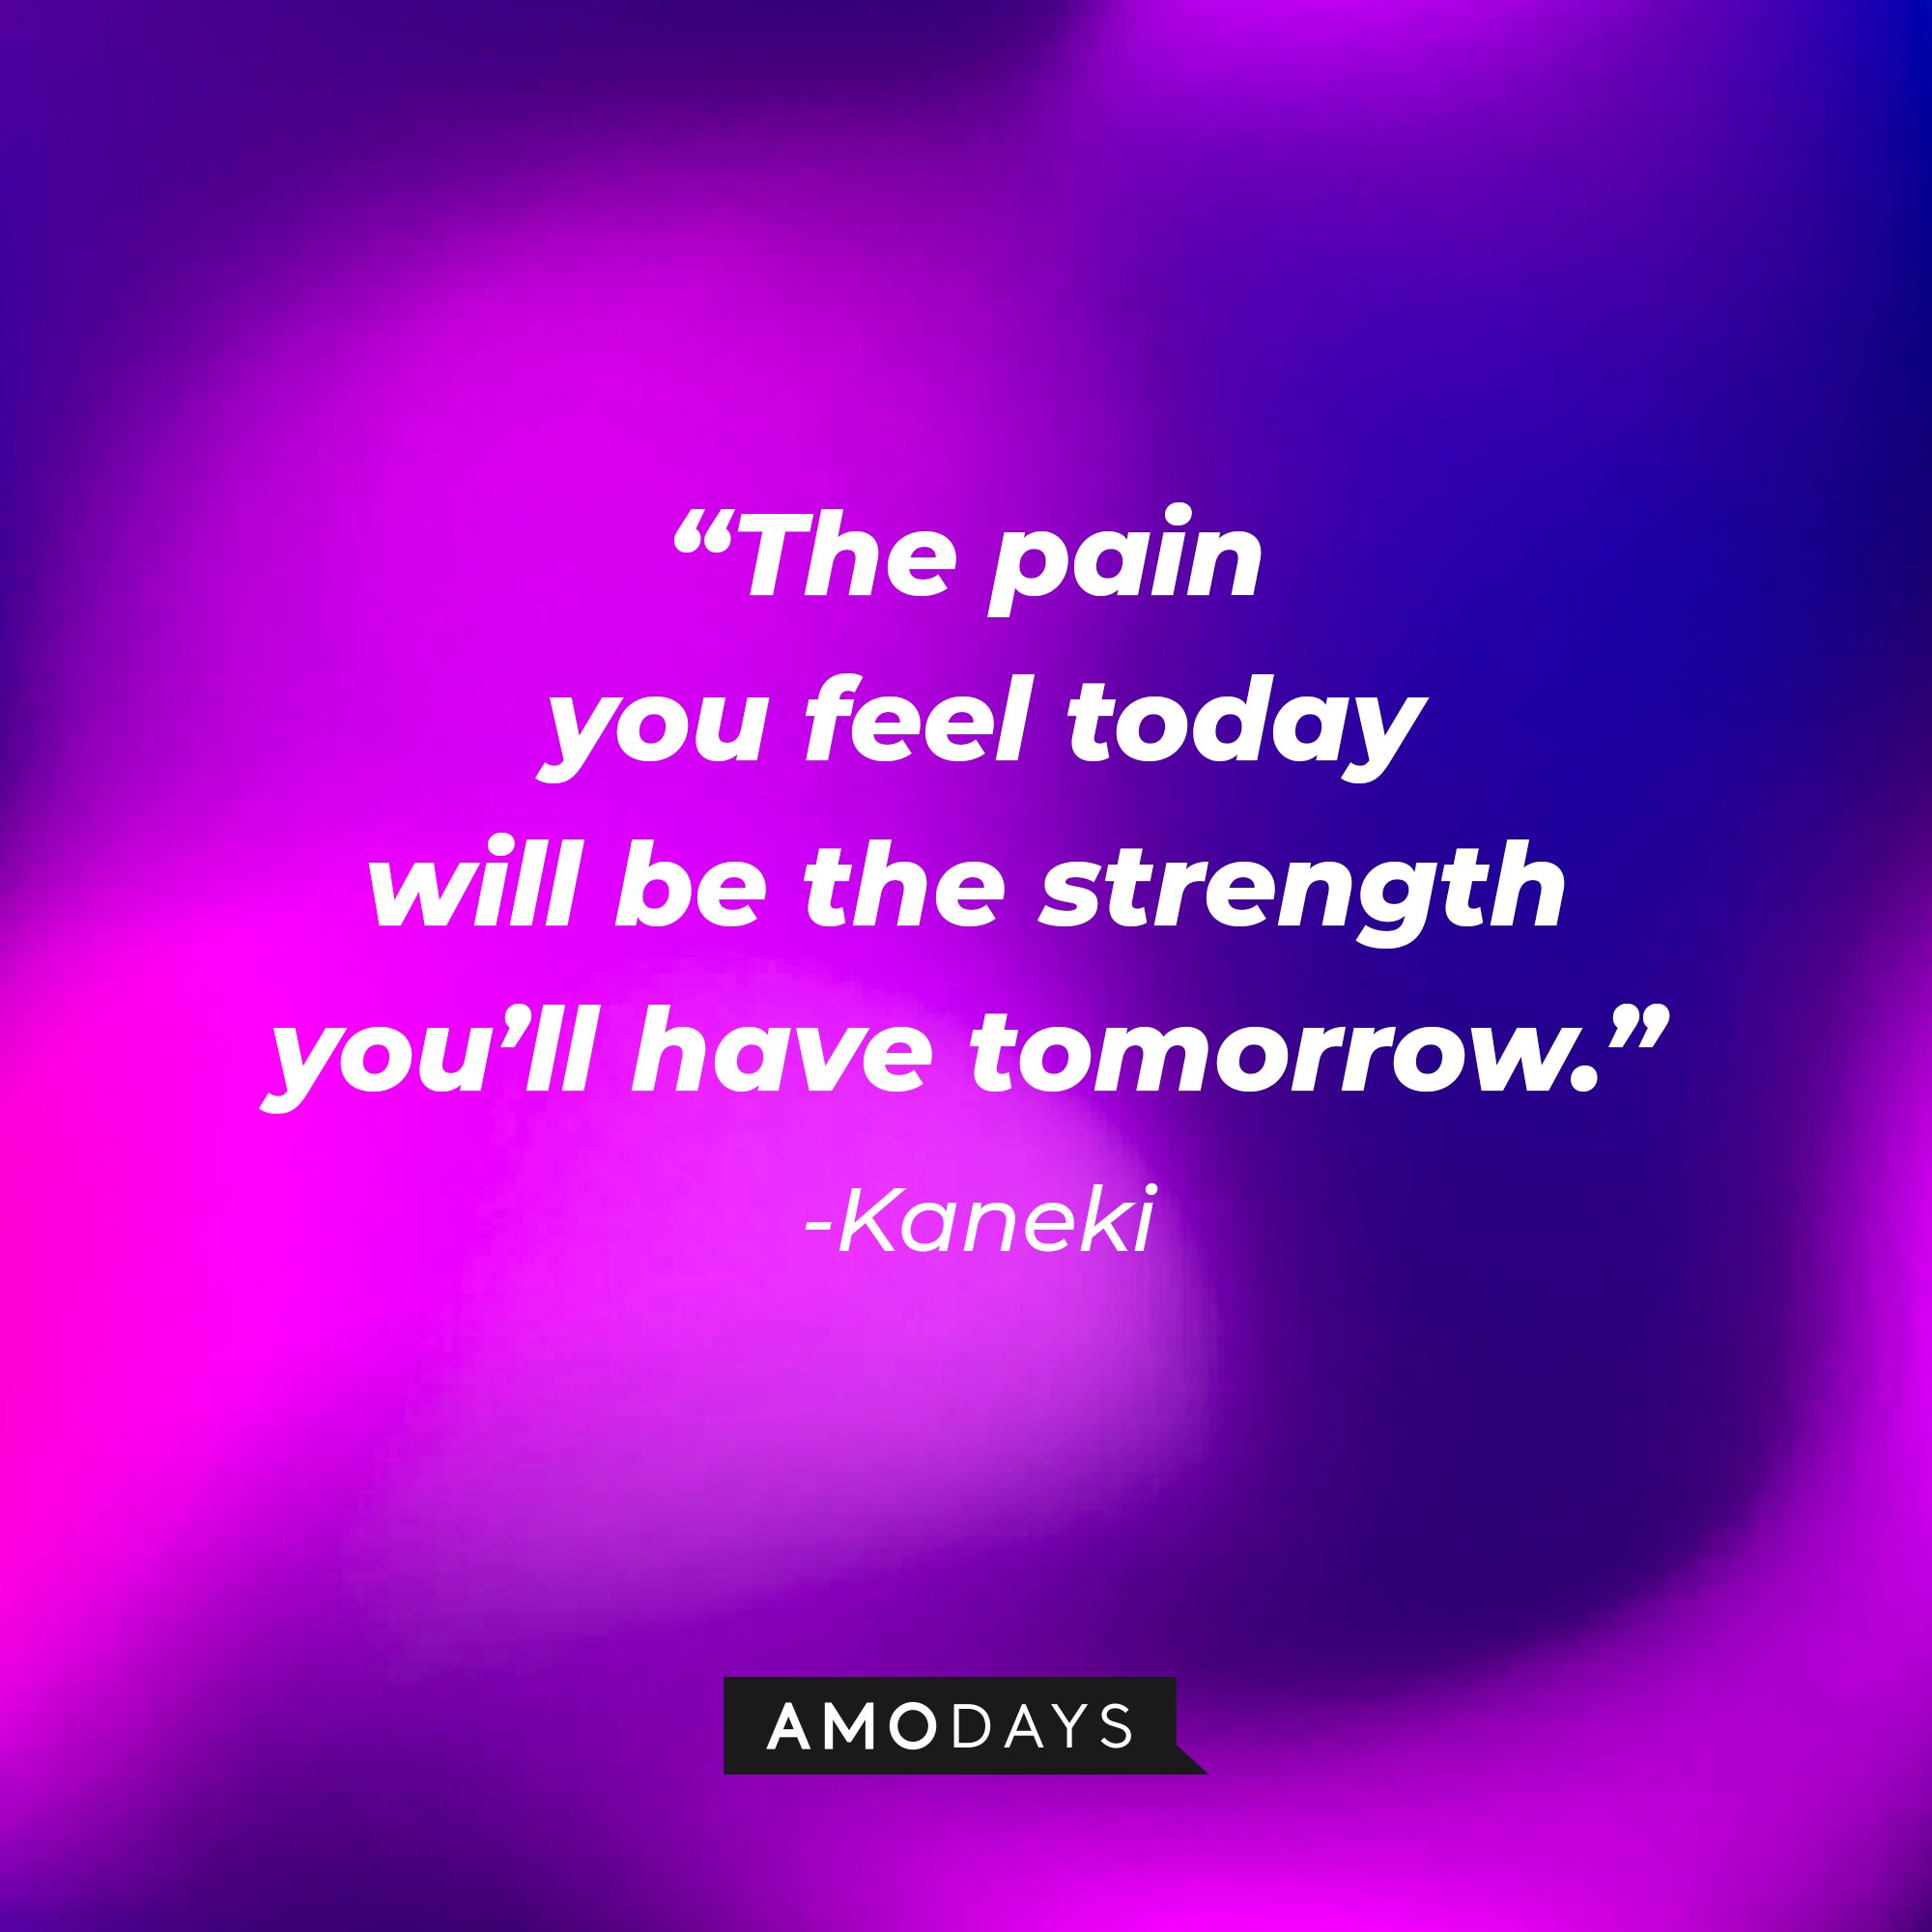 Kaneki's quote: “The pain you feel today will be the strength you’ll have tomorrow.” | Image: AmoDays